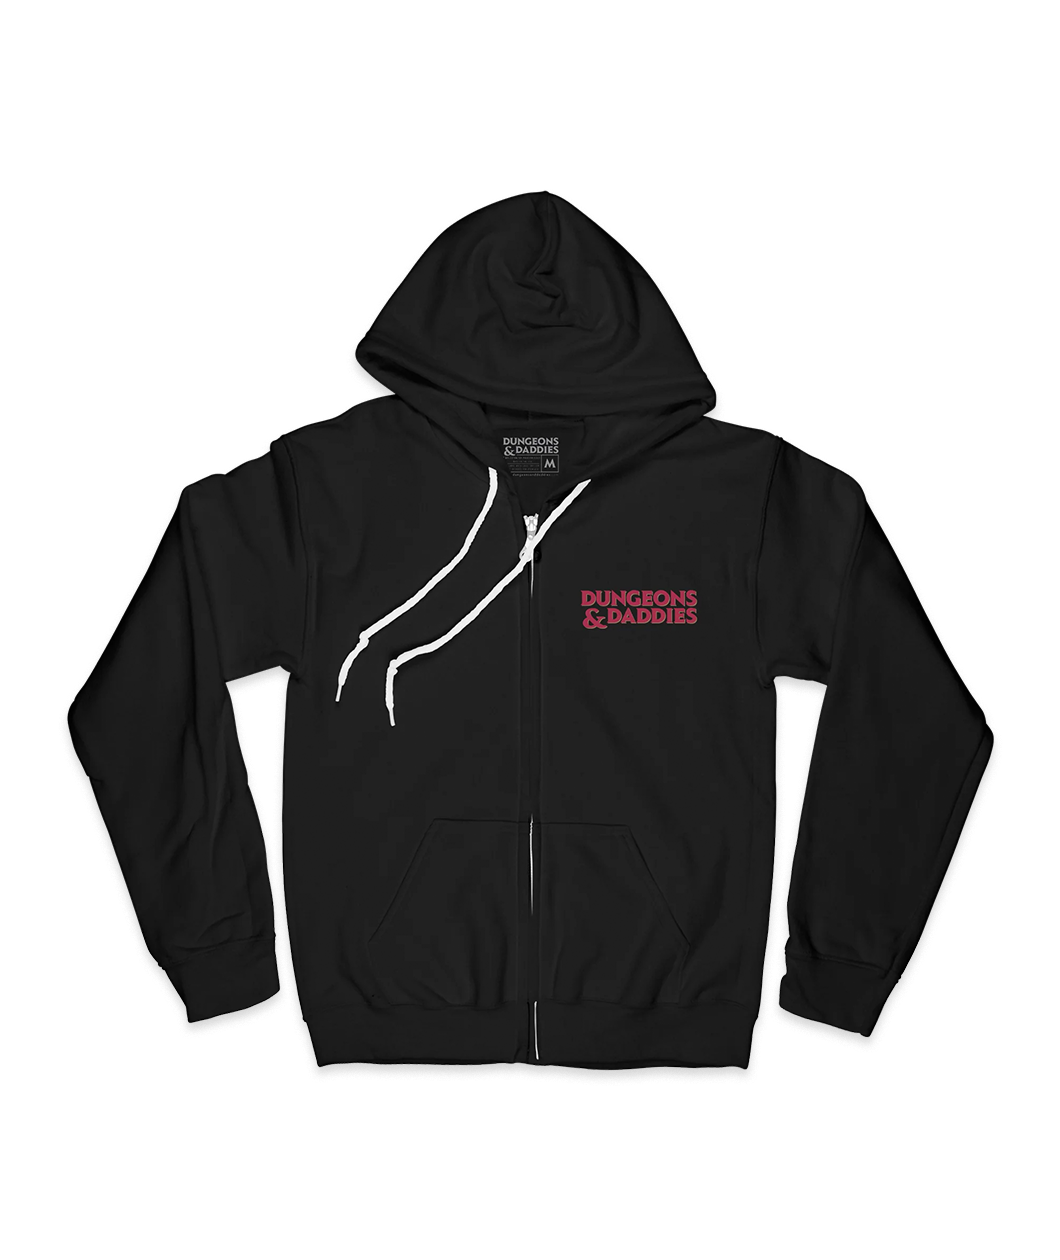 Black full zip hoodie with white drawstrings and the Dungeons & Daddies logo in red in the left upper chest.